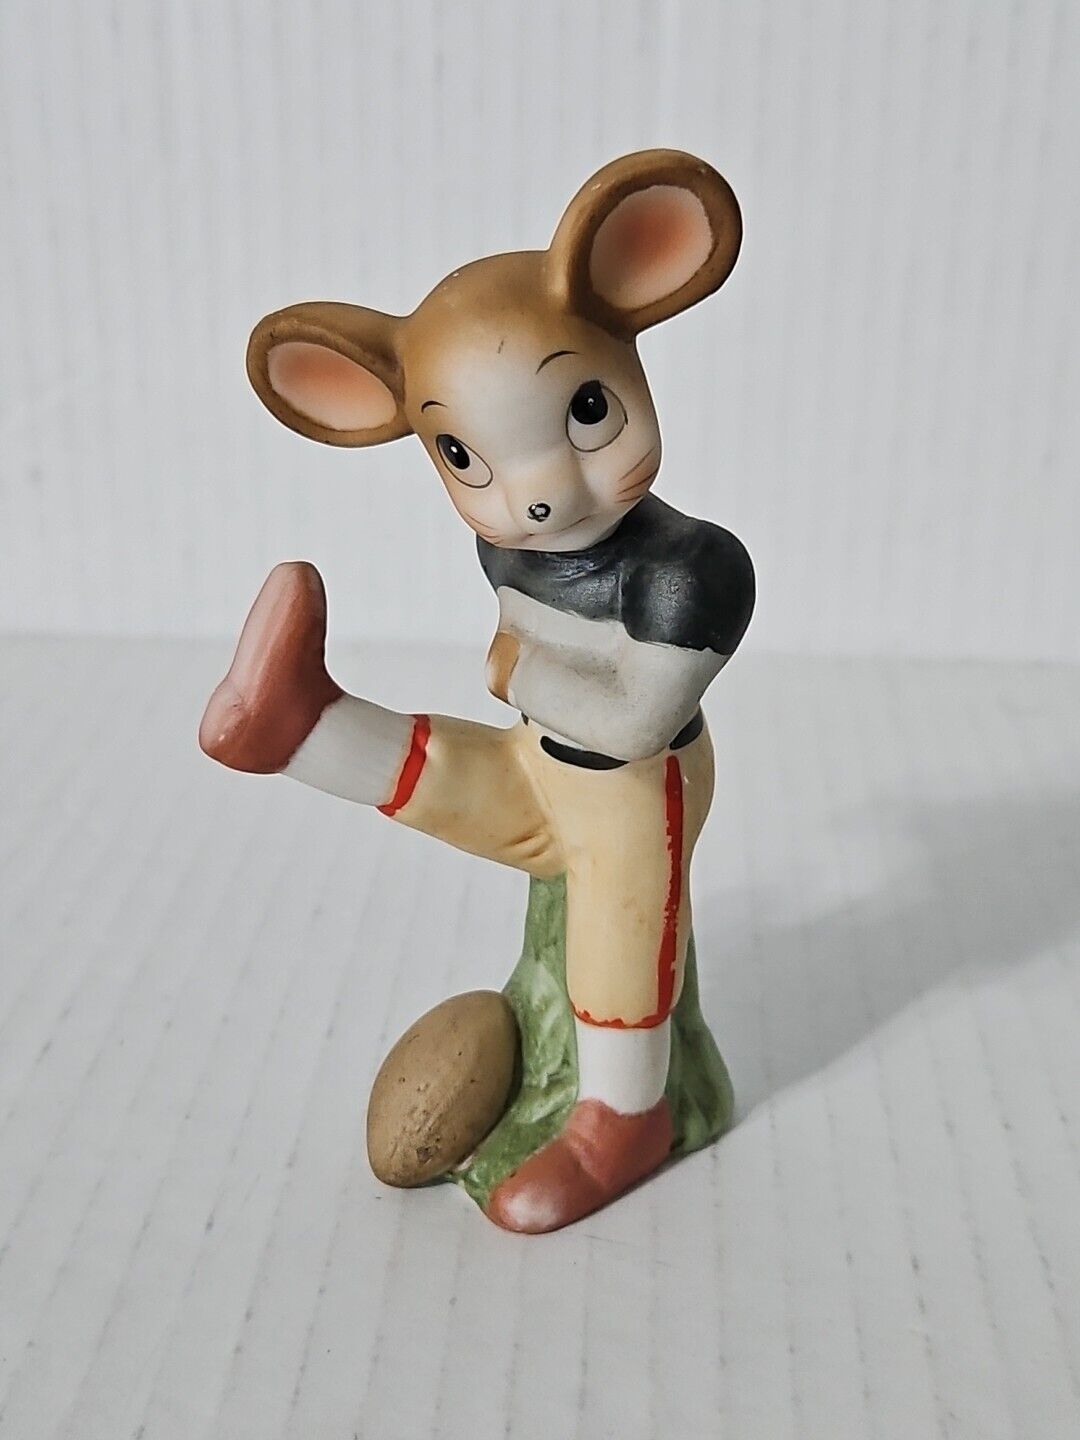 Vintage Anthropomorphic Made In Japan Mouse Sport 4 Inches Figurines Football